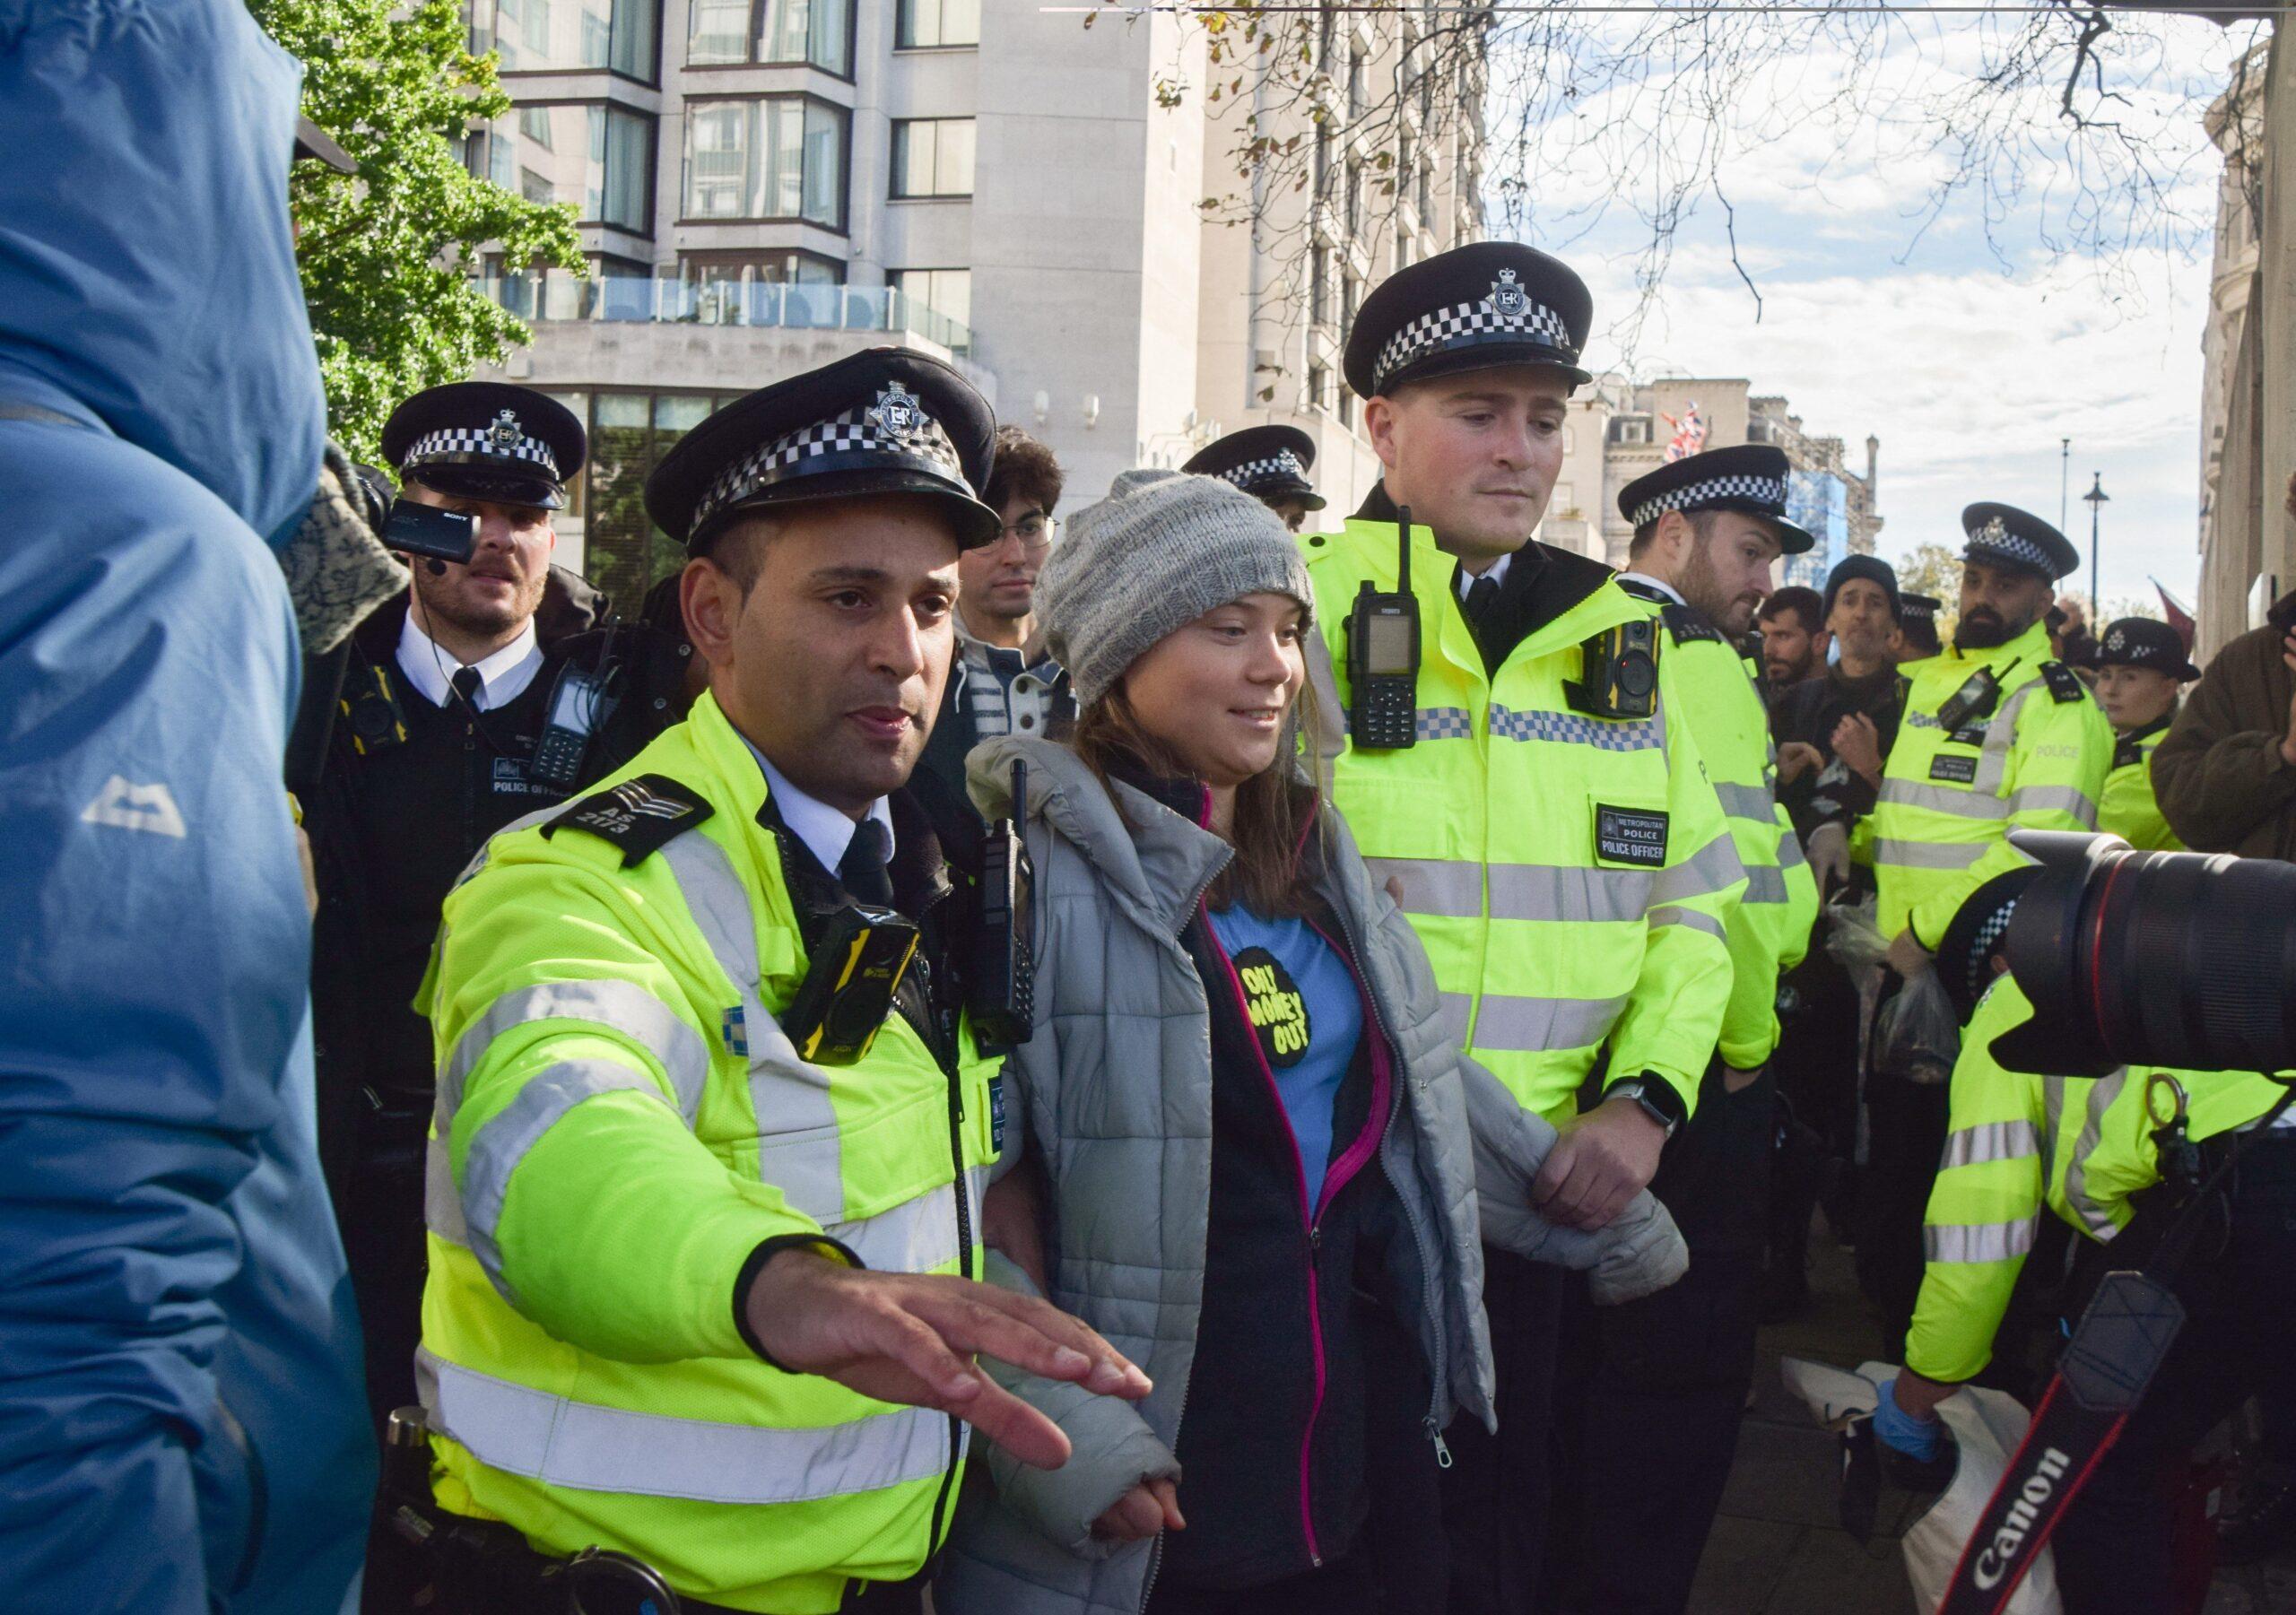 Greta Thunberg UNFAZED During Arrest Following Oil Protest In London